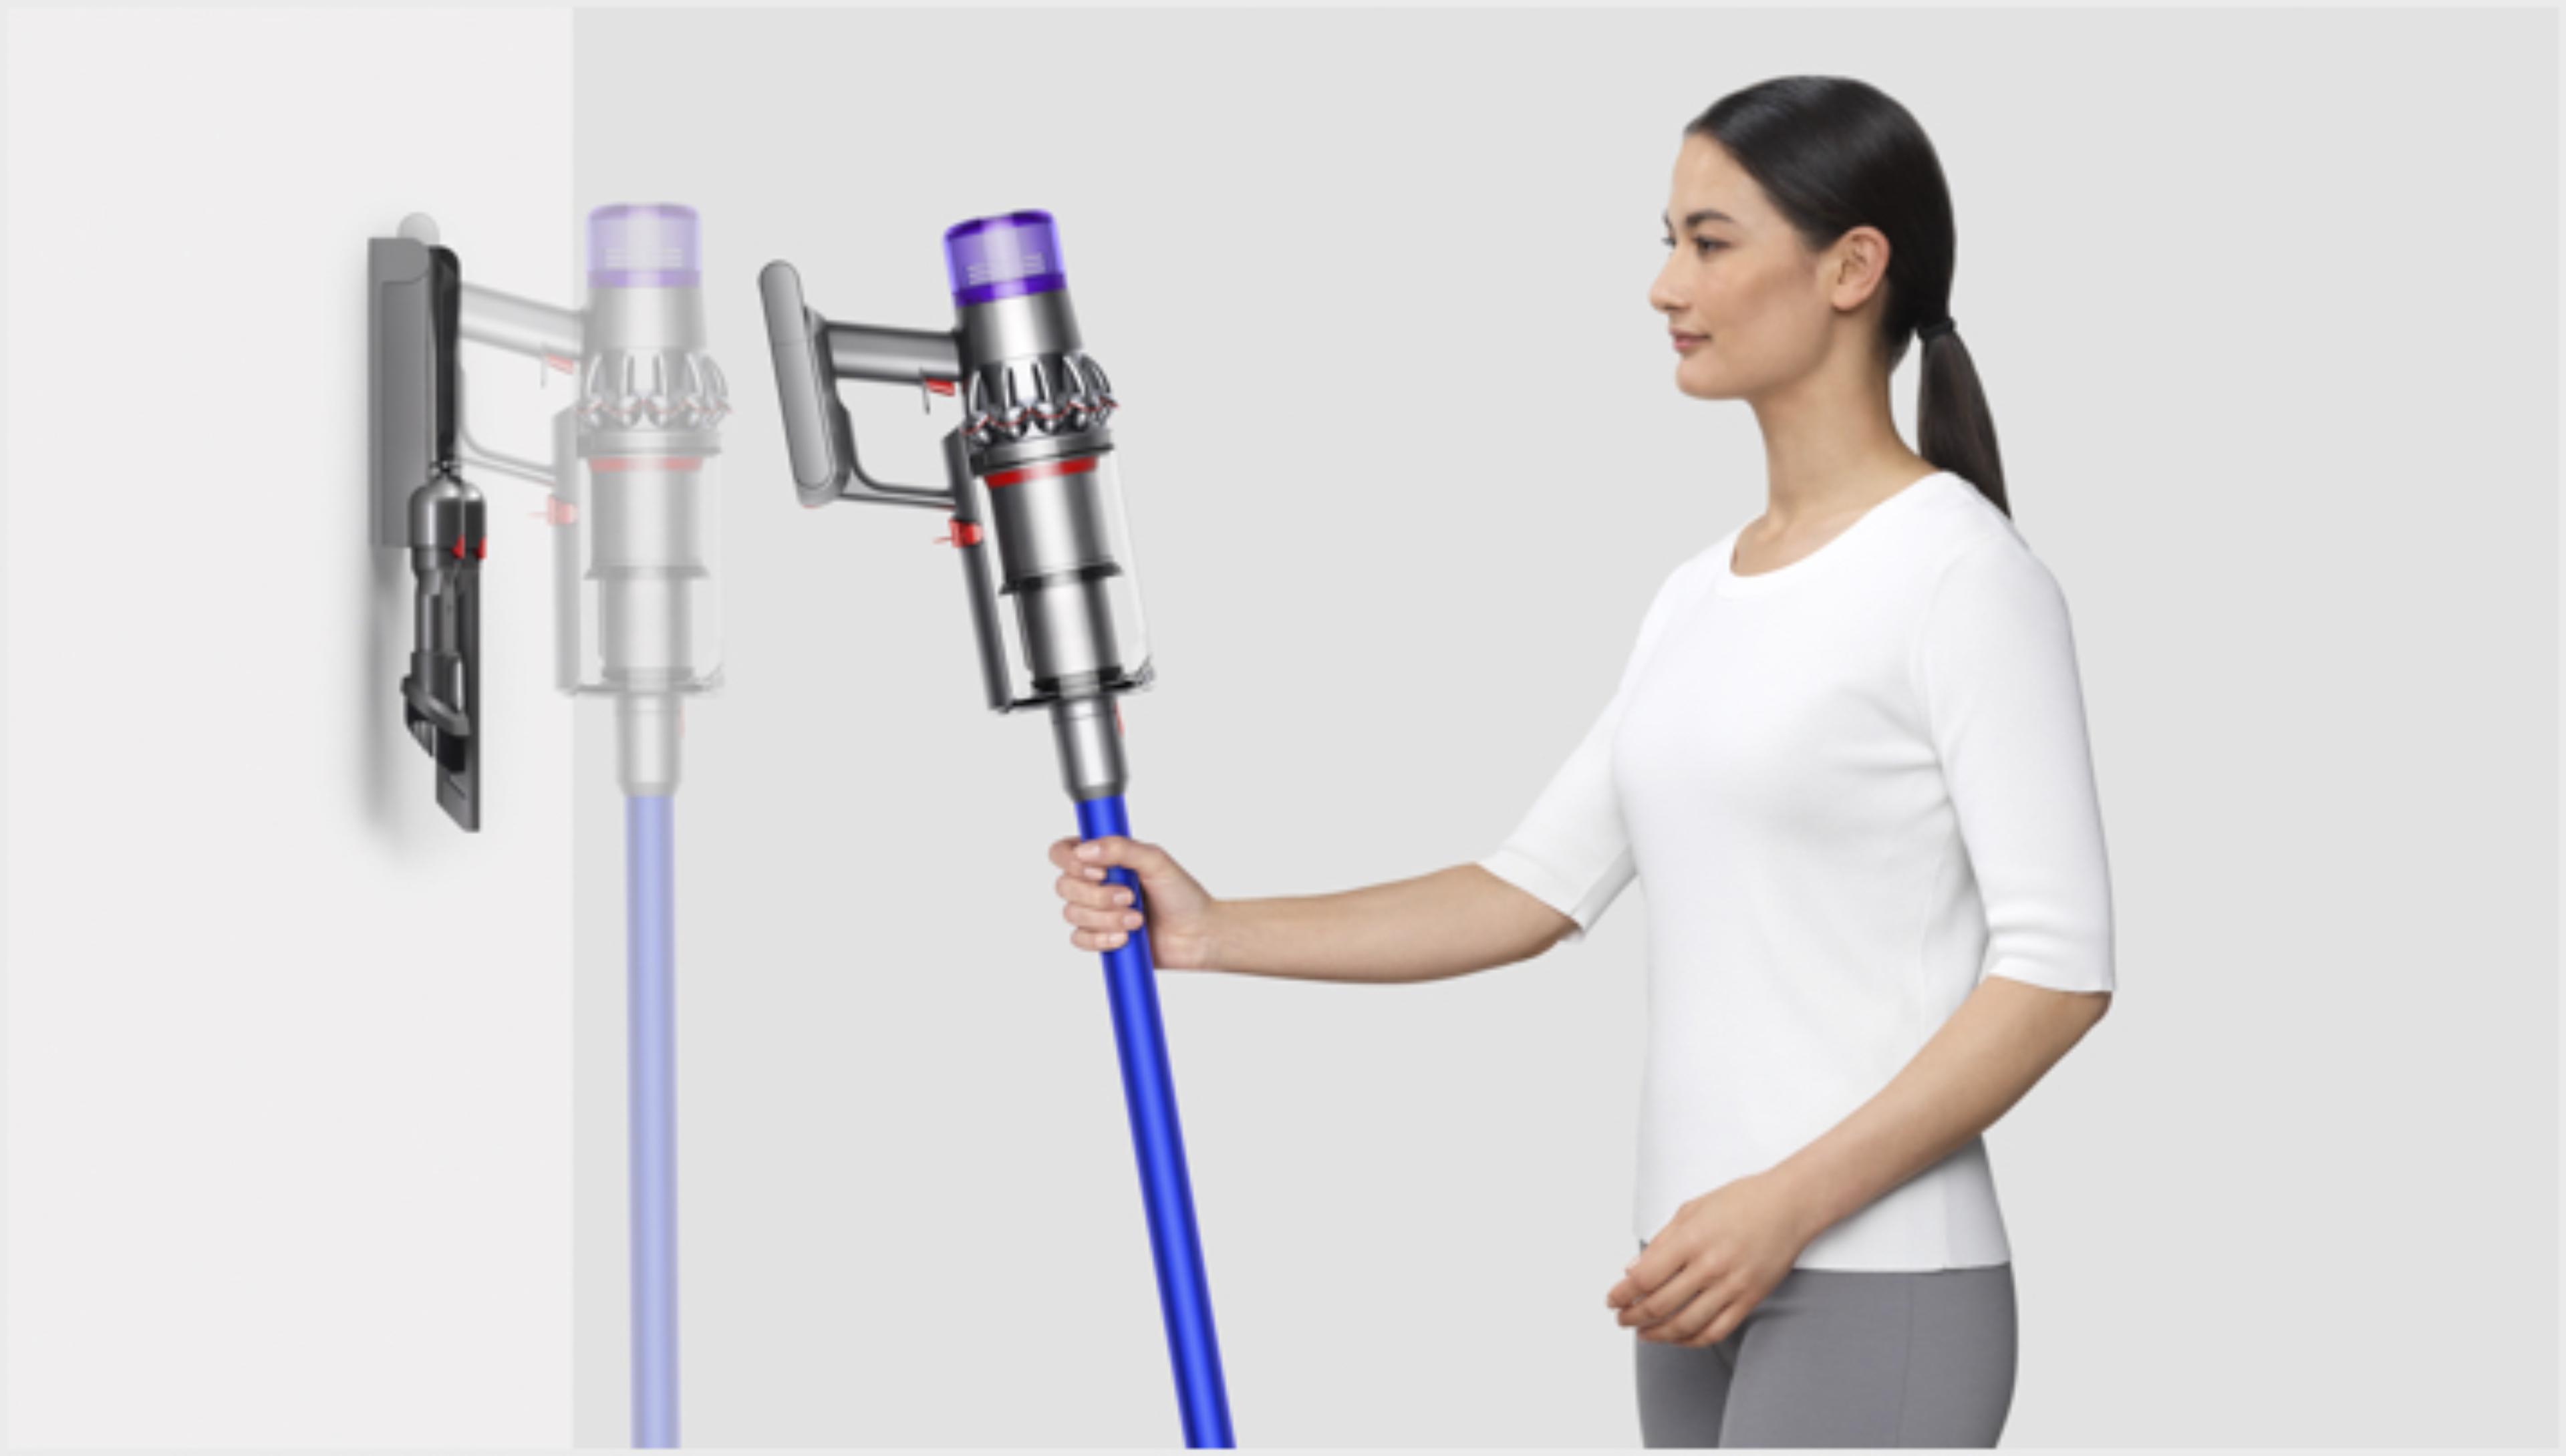 Woman placing Dyson V11™ vacuum into wall charging dock